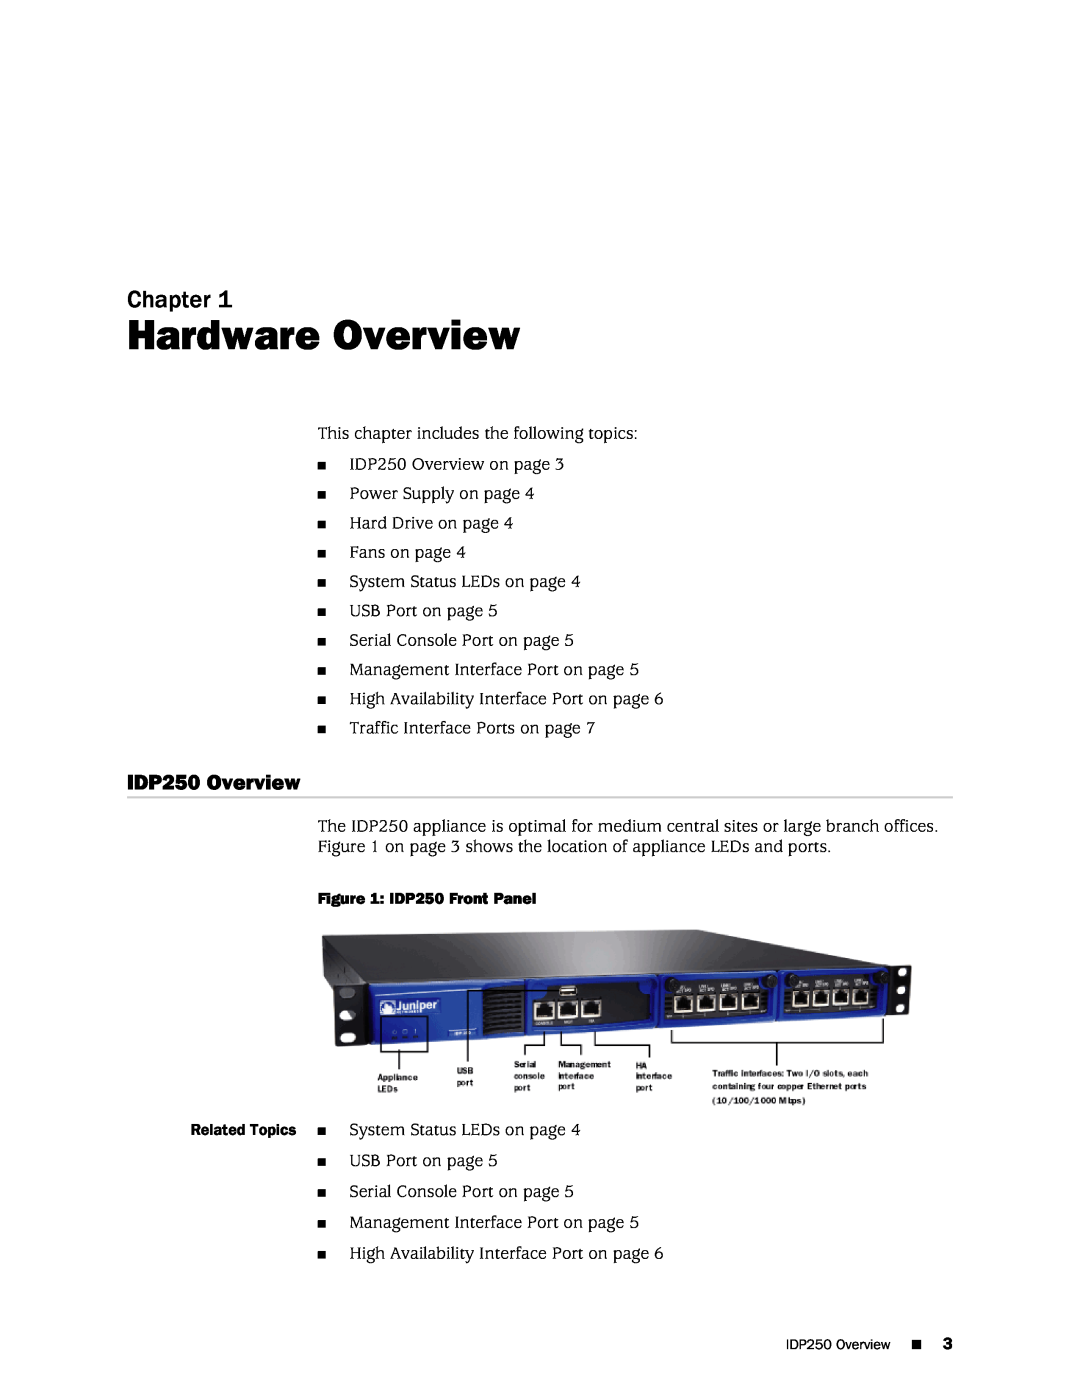 Juniper Networks manual Hardware Overview, Chapter, IDP250 Overview 